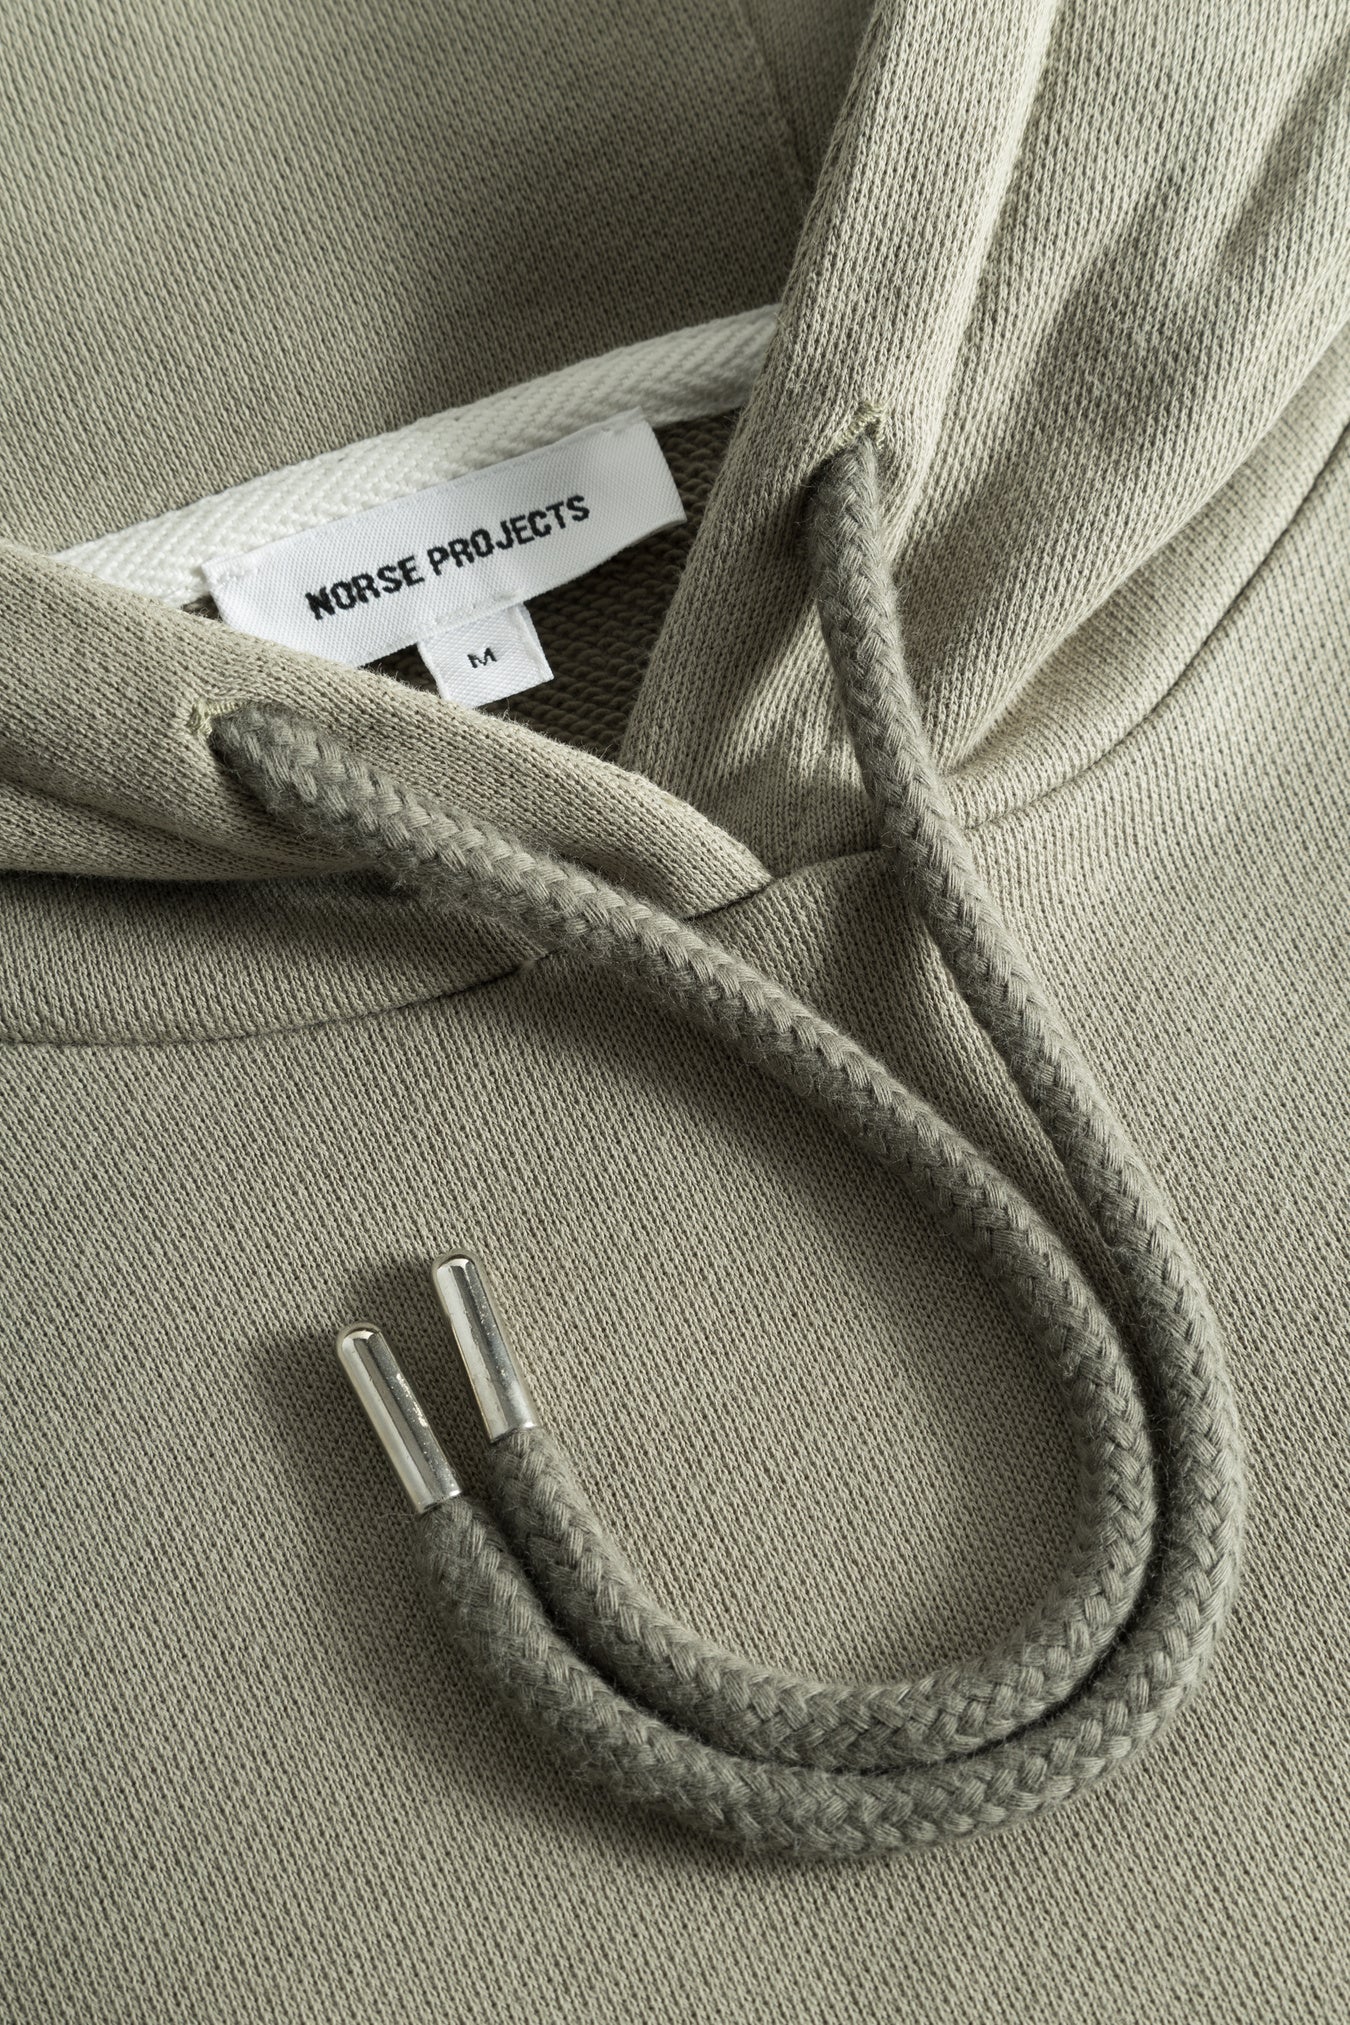 Vagn Classic Hoodie - Clay